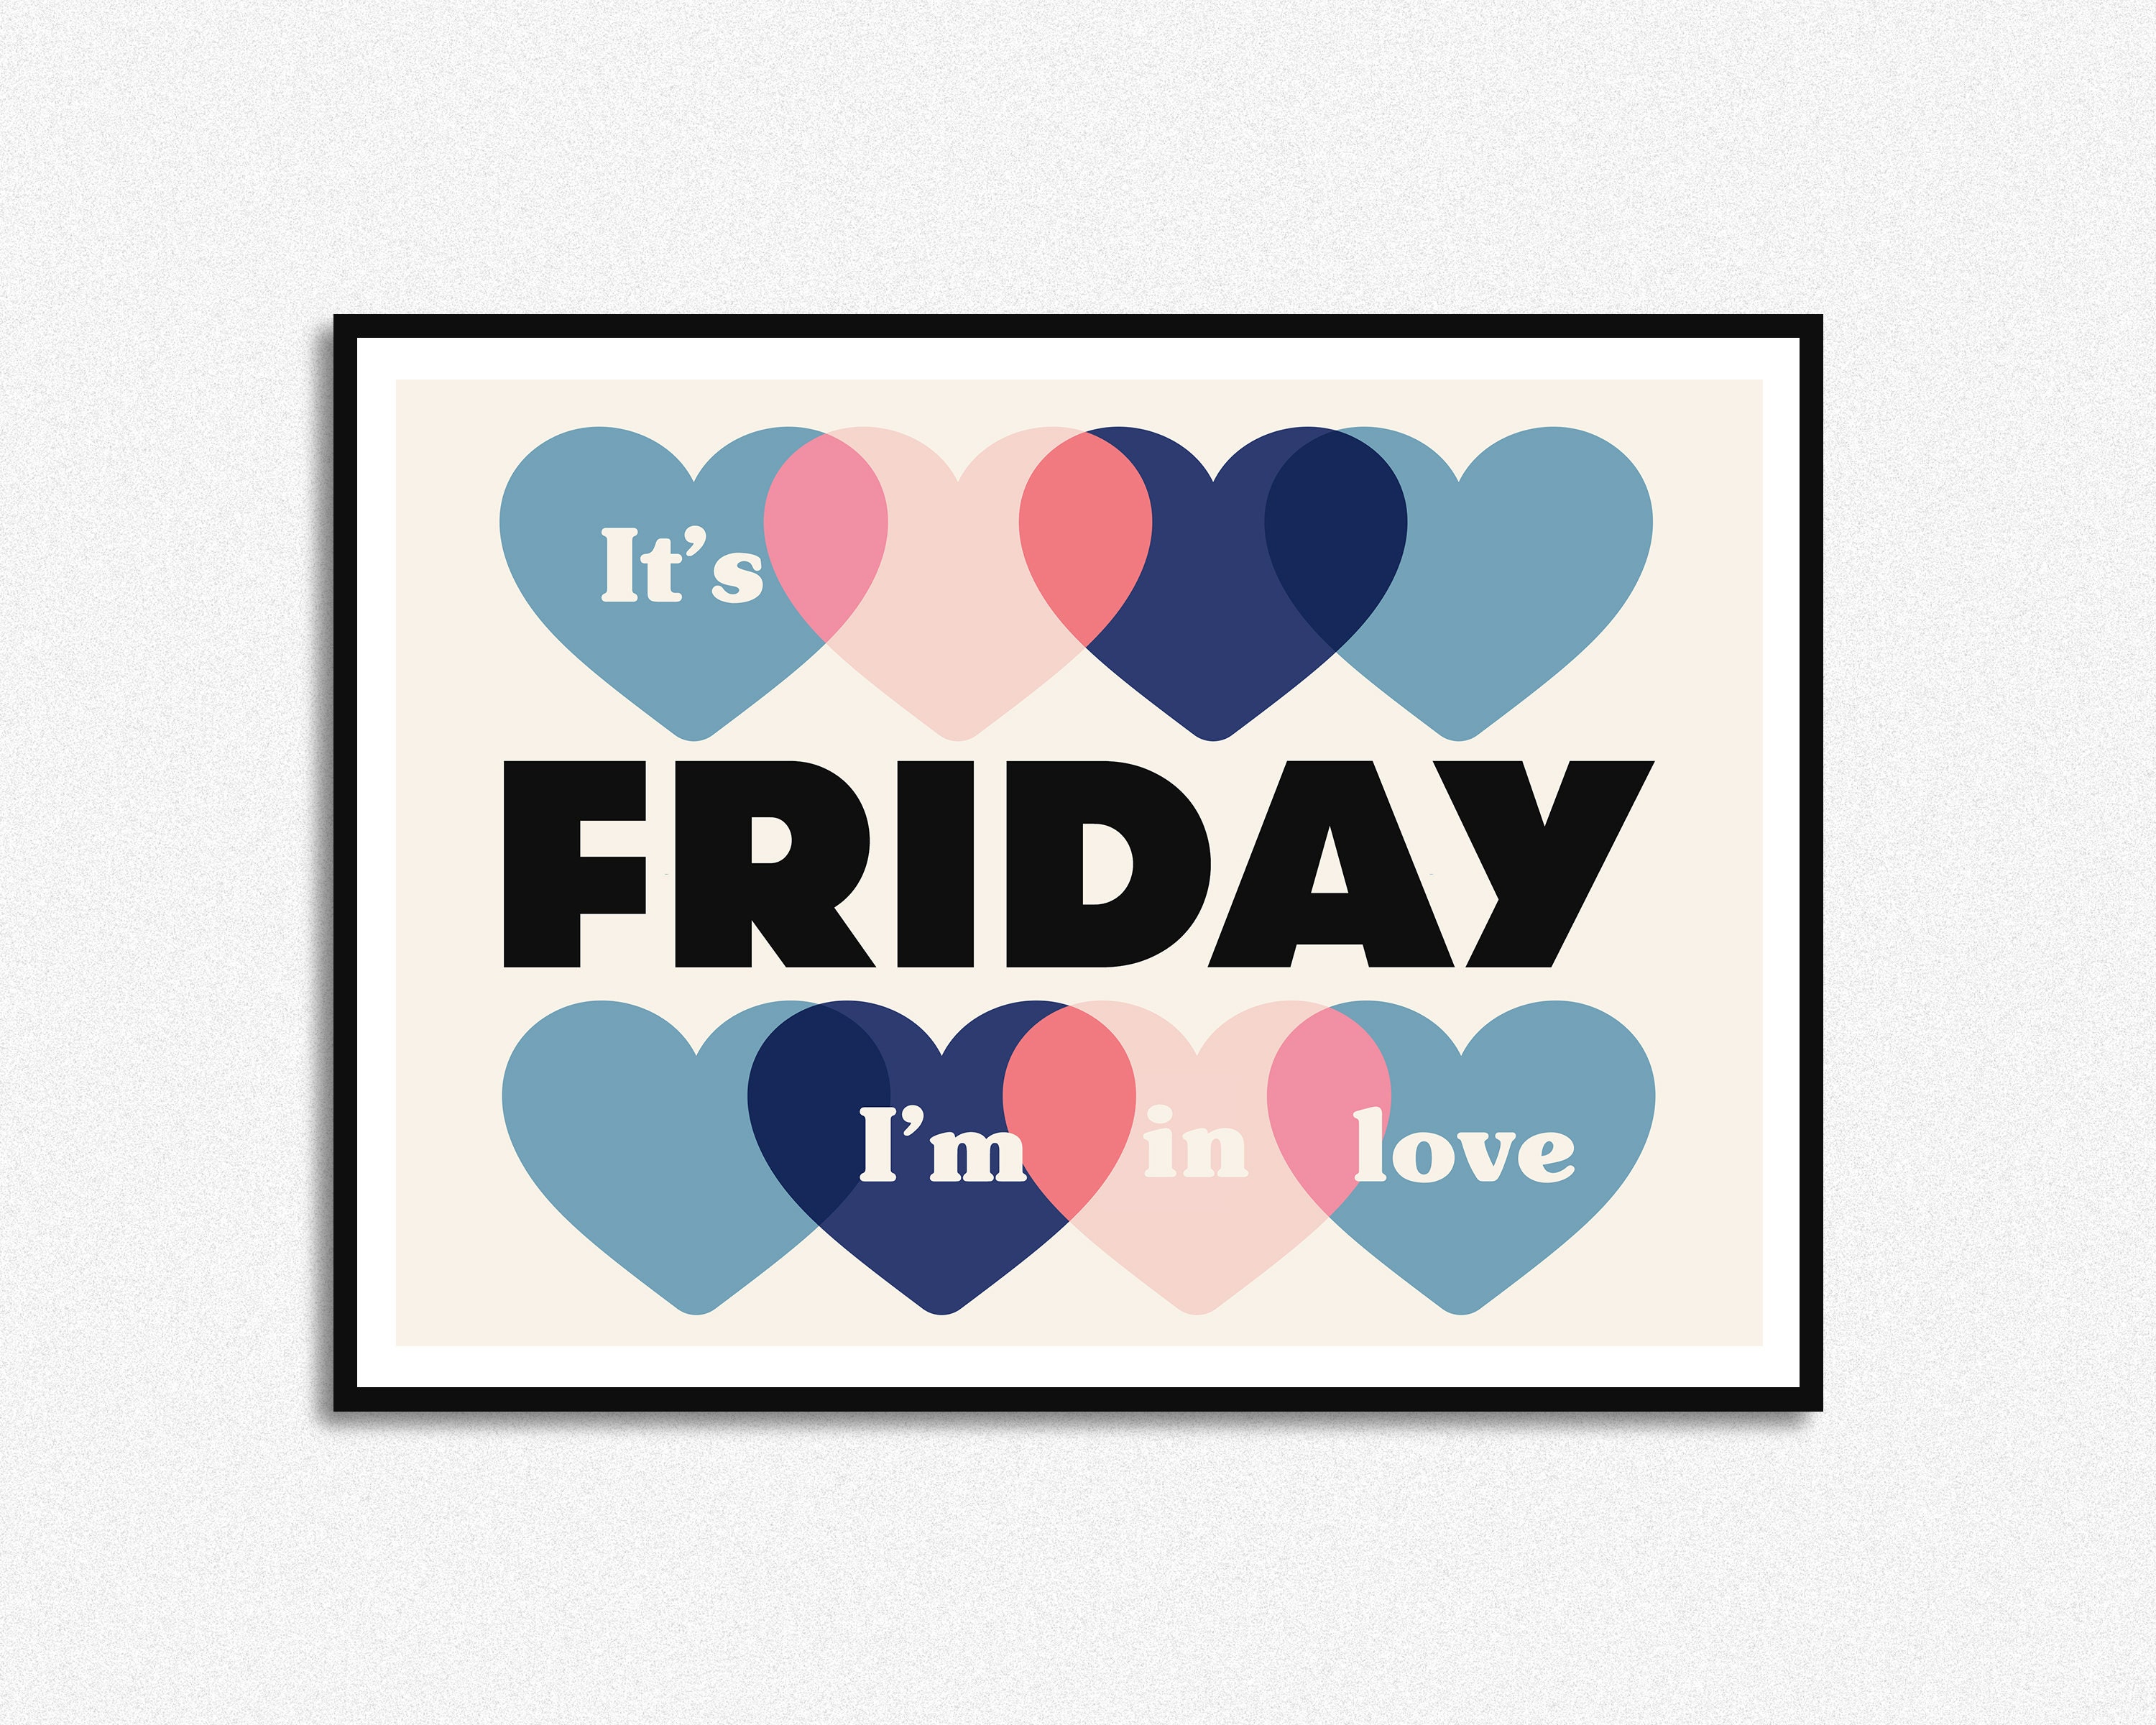 Friday i in love the cure. Friday i'm in Love. The Cure Friday i'm in Love логотип. Friday i m in Love the Cure. Friday i'm in Love перевод.